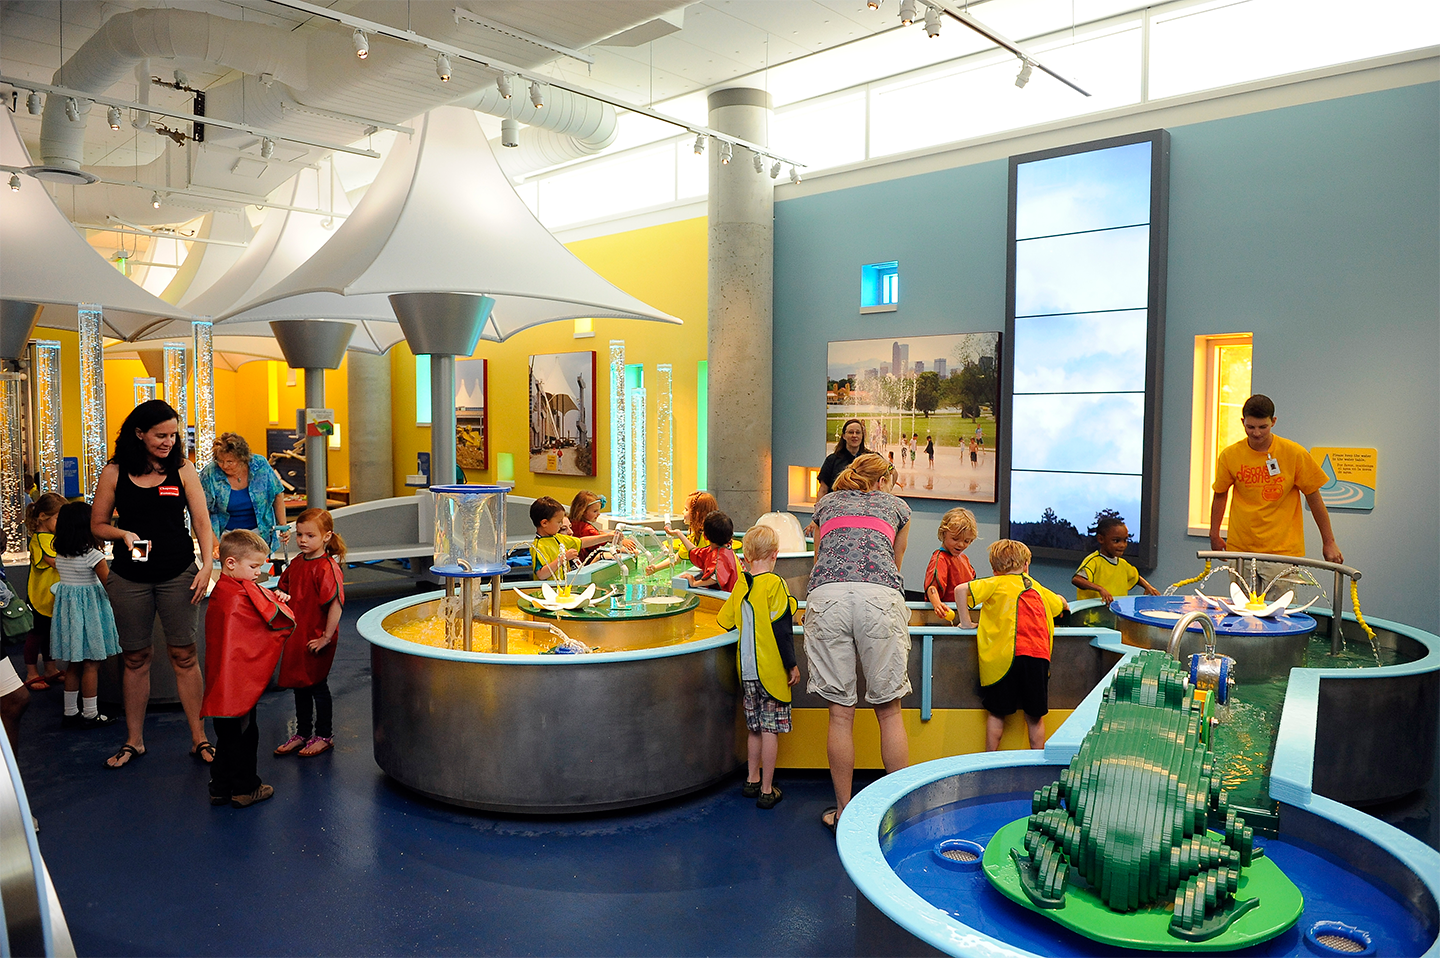 discovery zone columbia